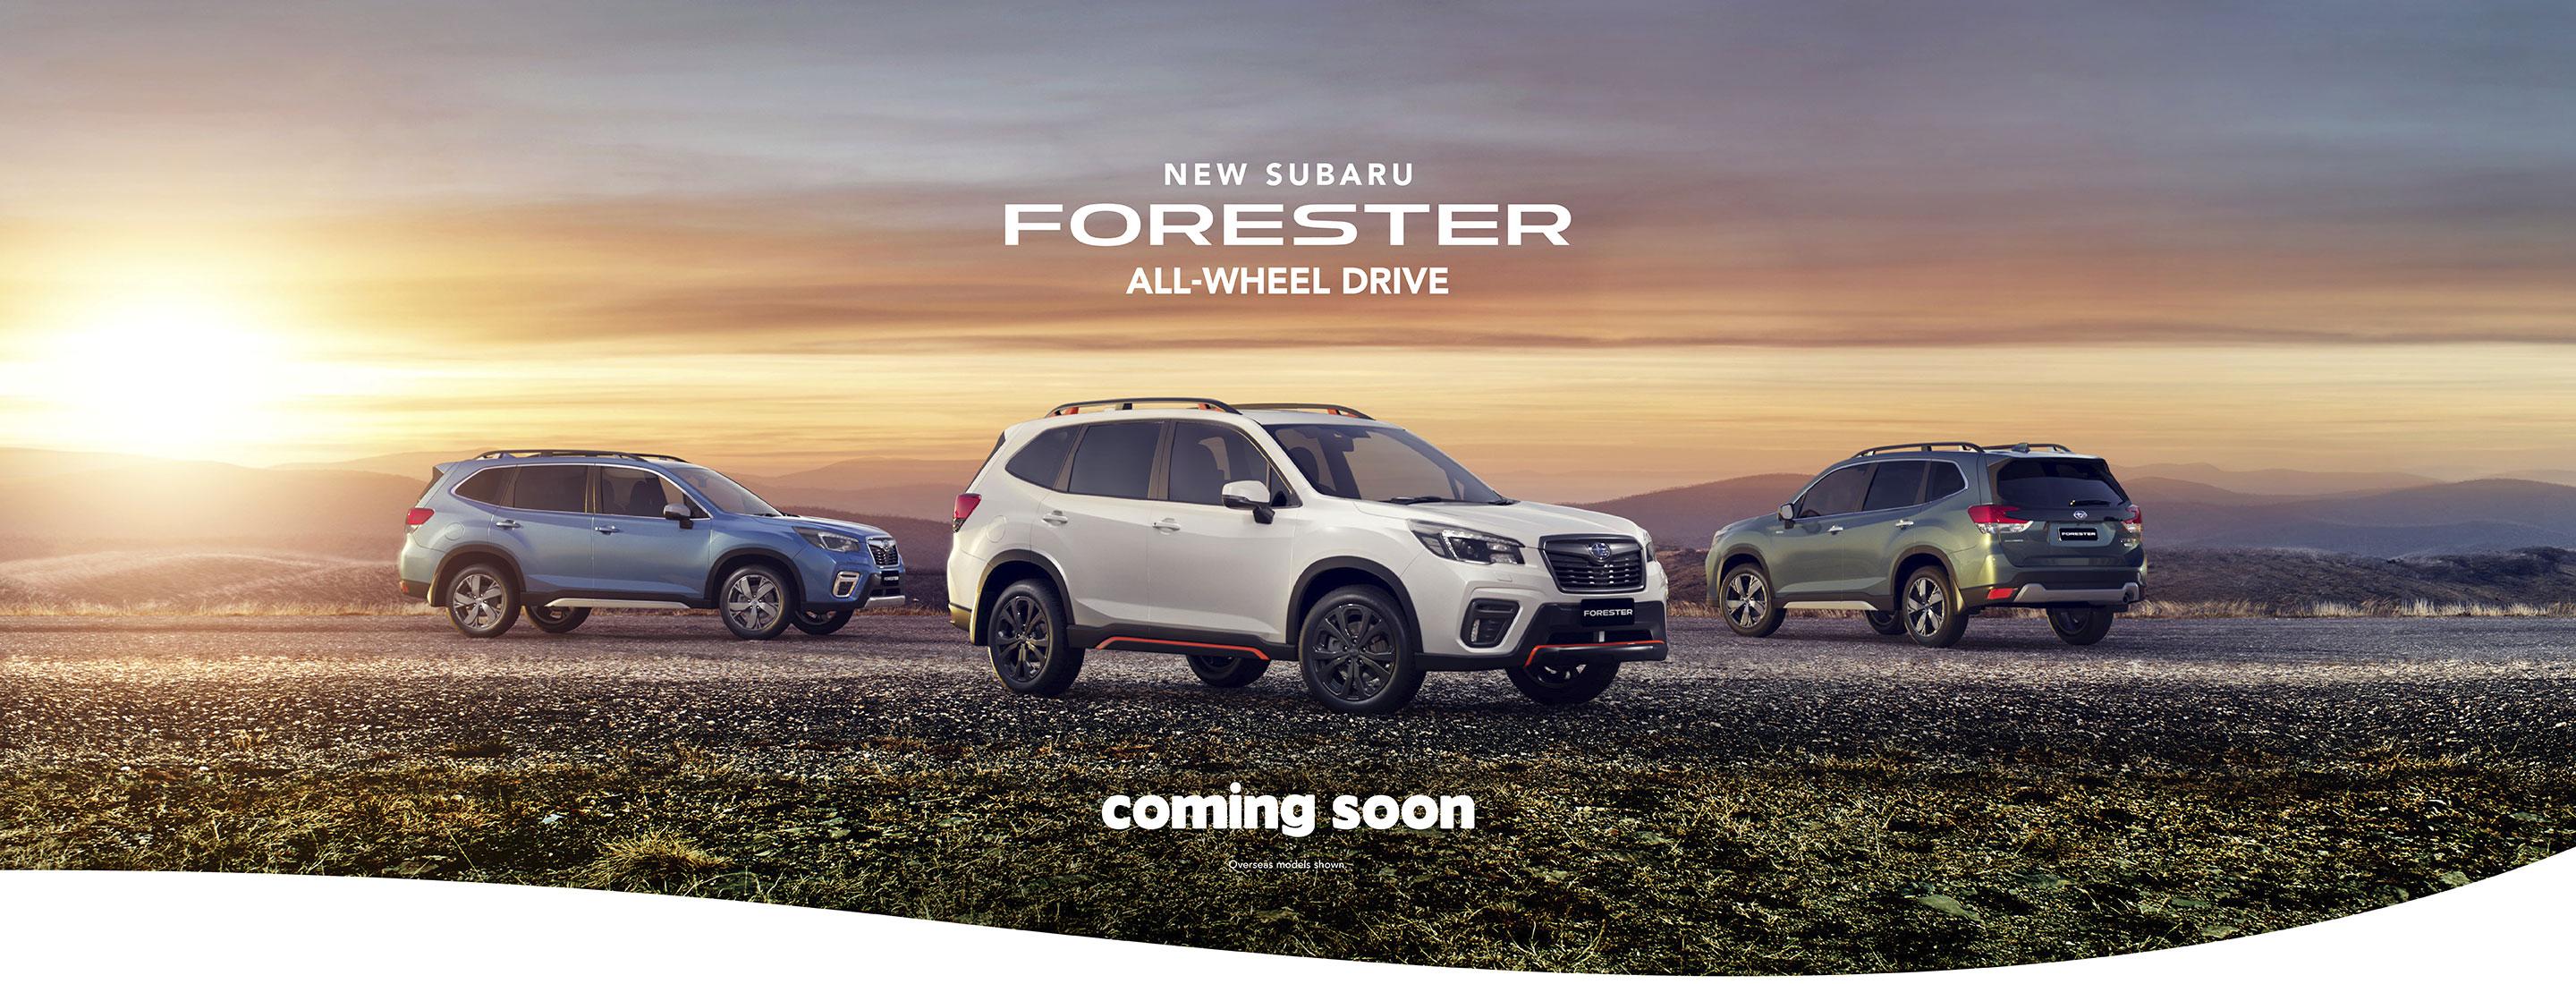 Sporty new model amps up Subaru Forester lineup